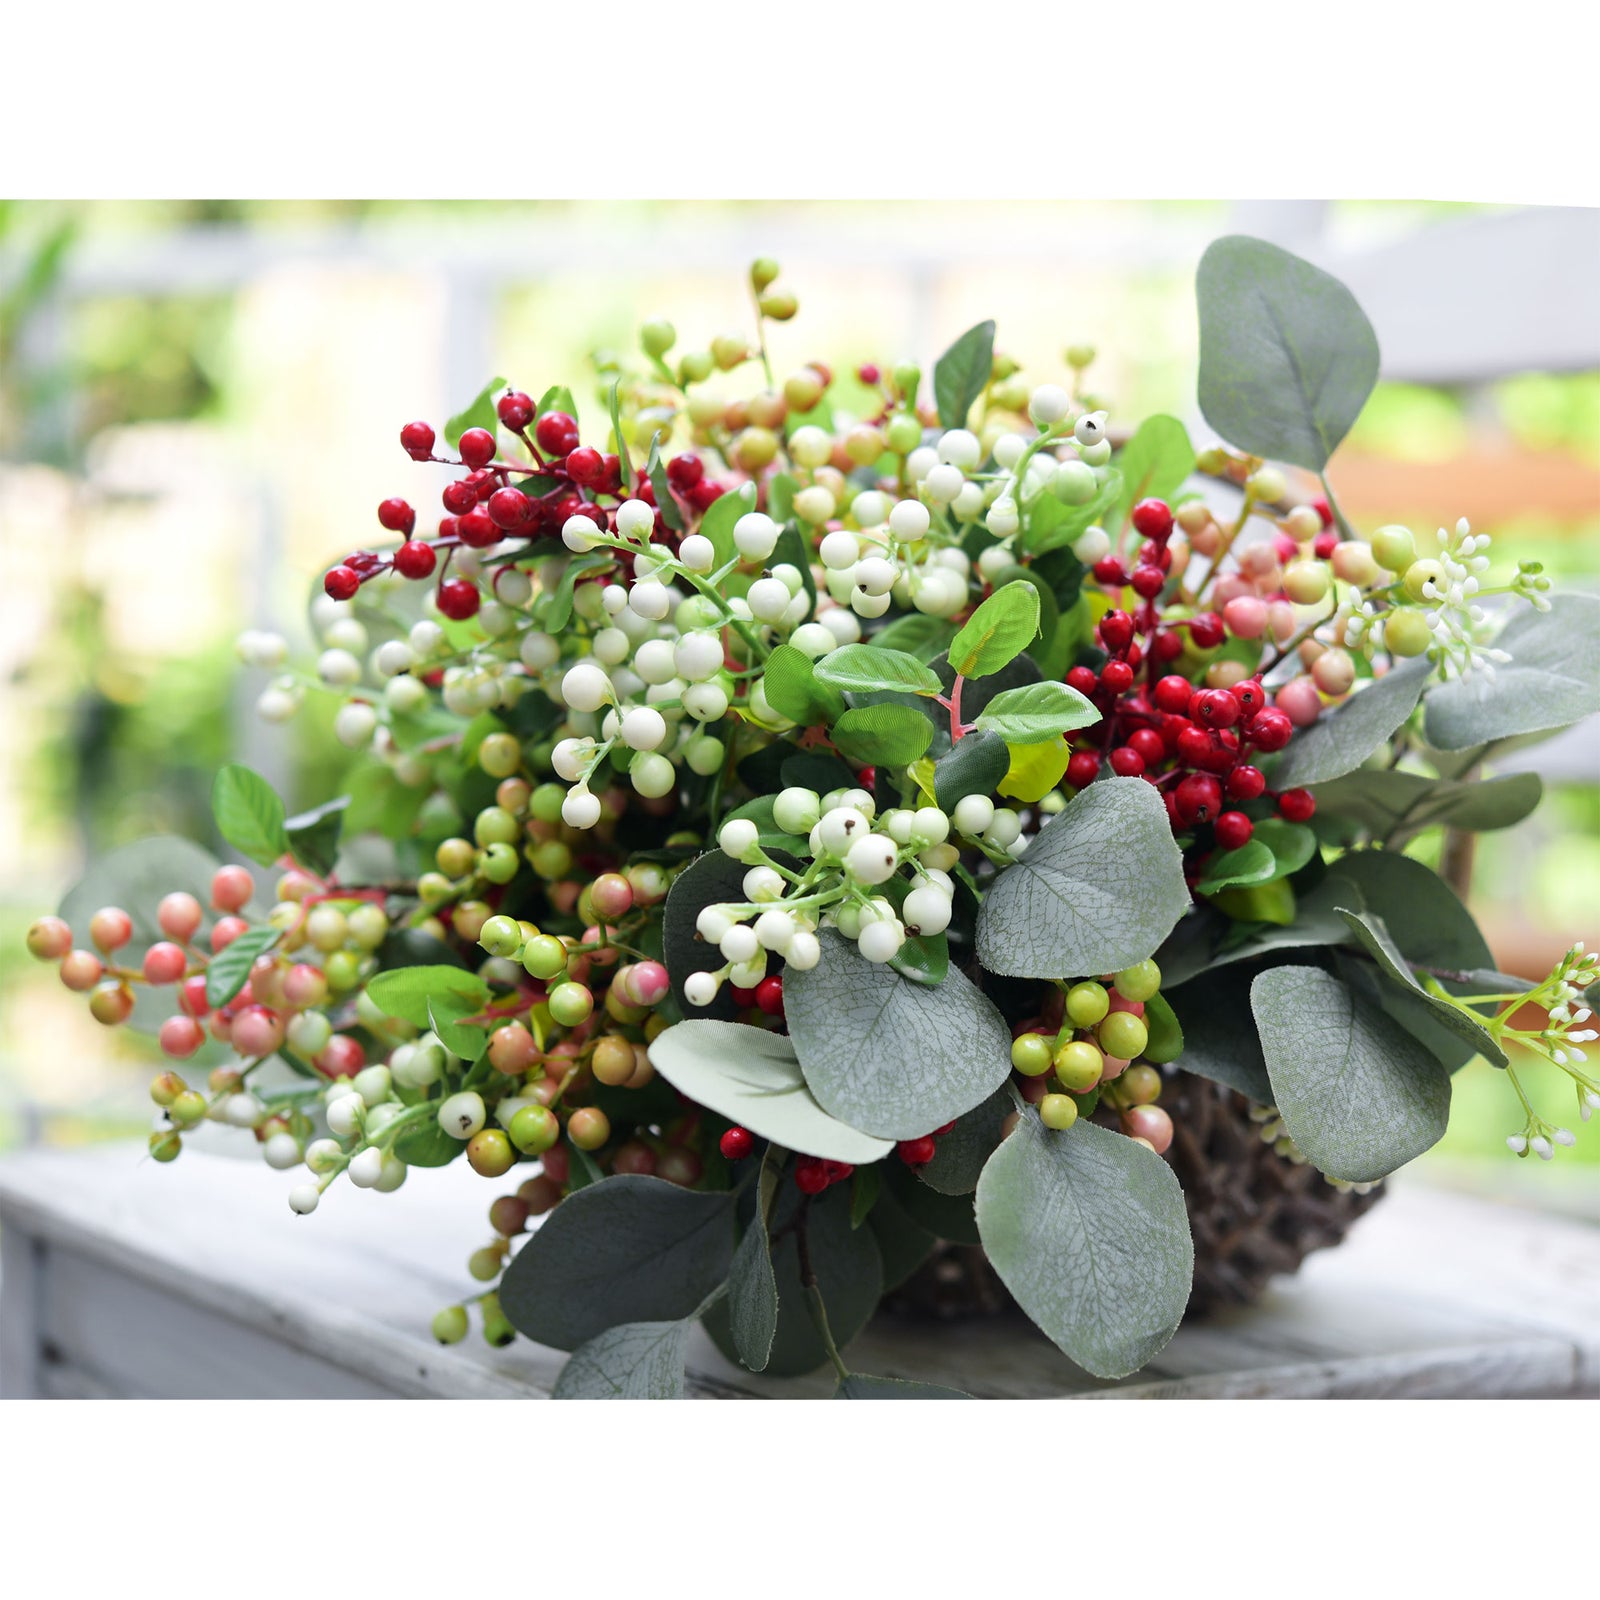 Holly and Pine Boughs With Red Berries Christmas Decor Large Pine Snow  Berry Boughs Winter Stems Great for Wreaths P 